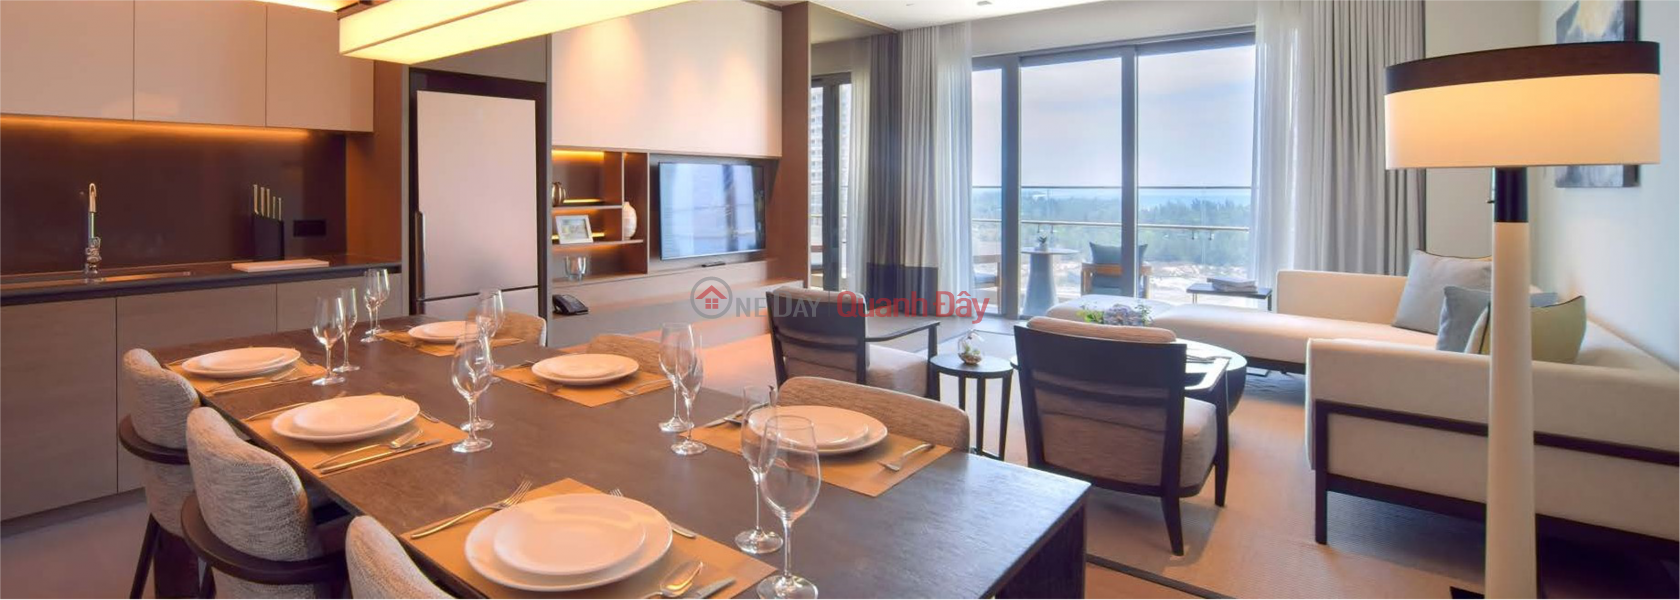 Two Bedroom Condo for Lease Long Term at Hoiana Residences, Vietnam | Sales, ₫ 9.5 Billion